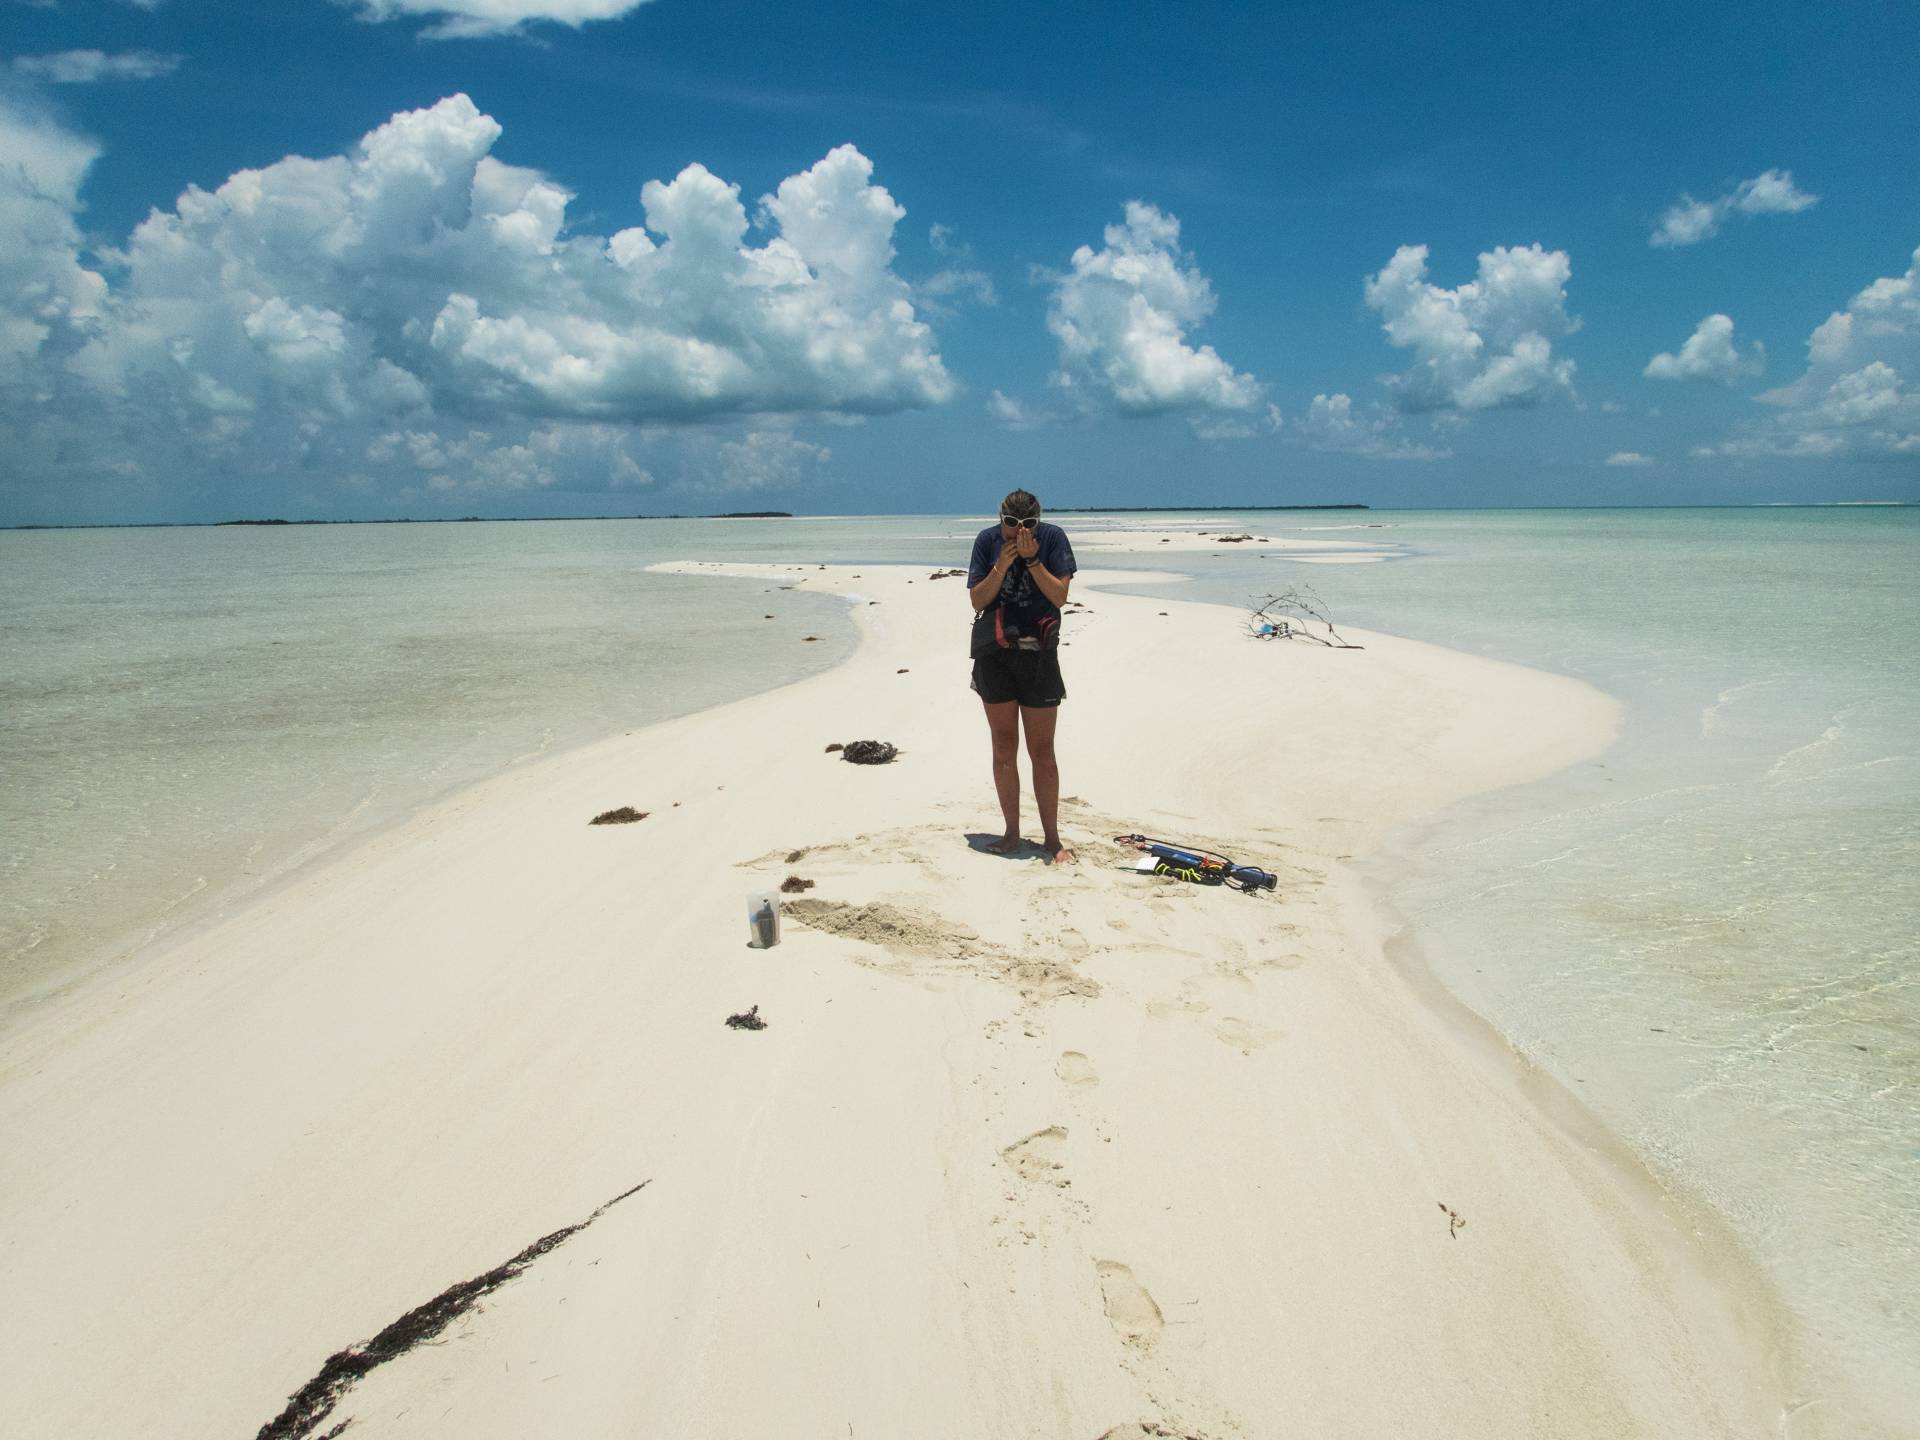 A student stands on a sand shoal